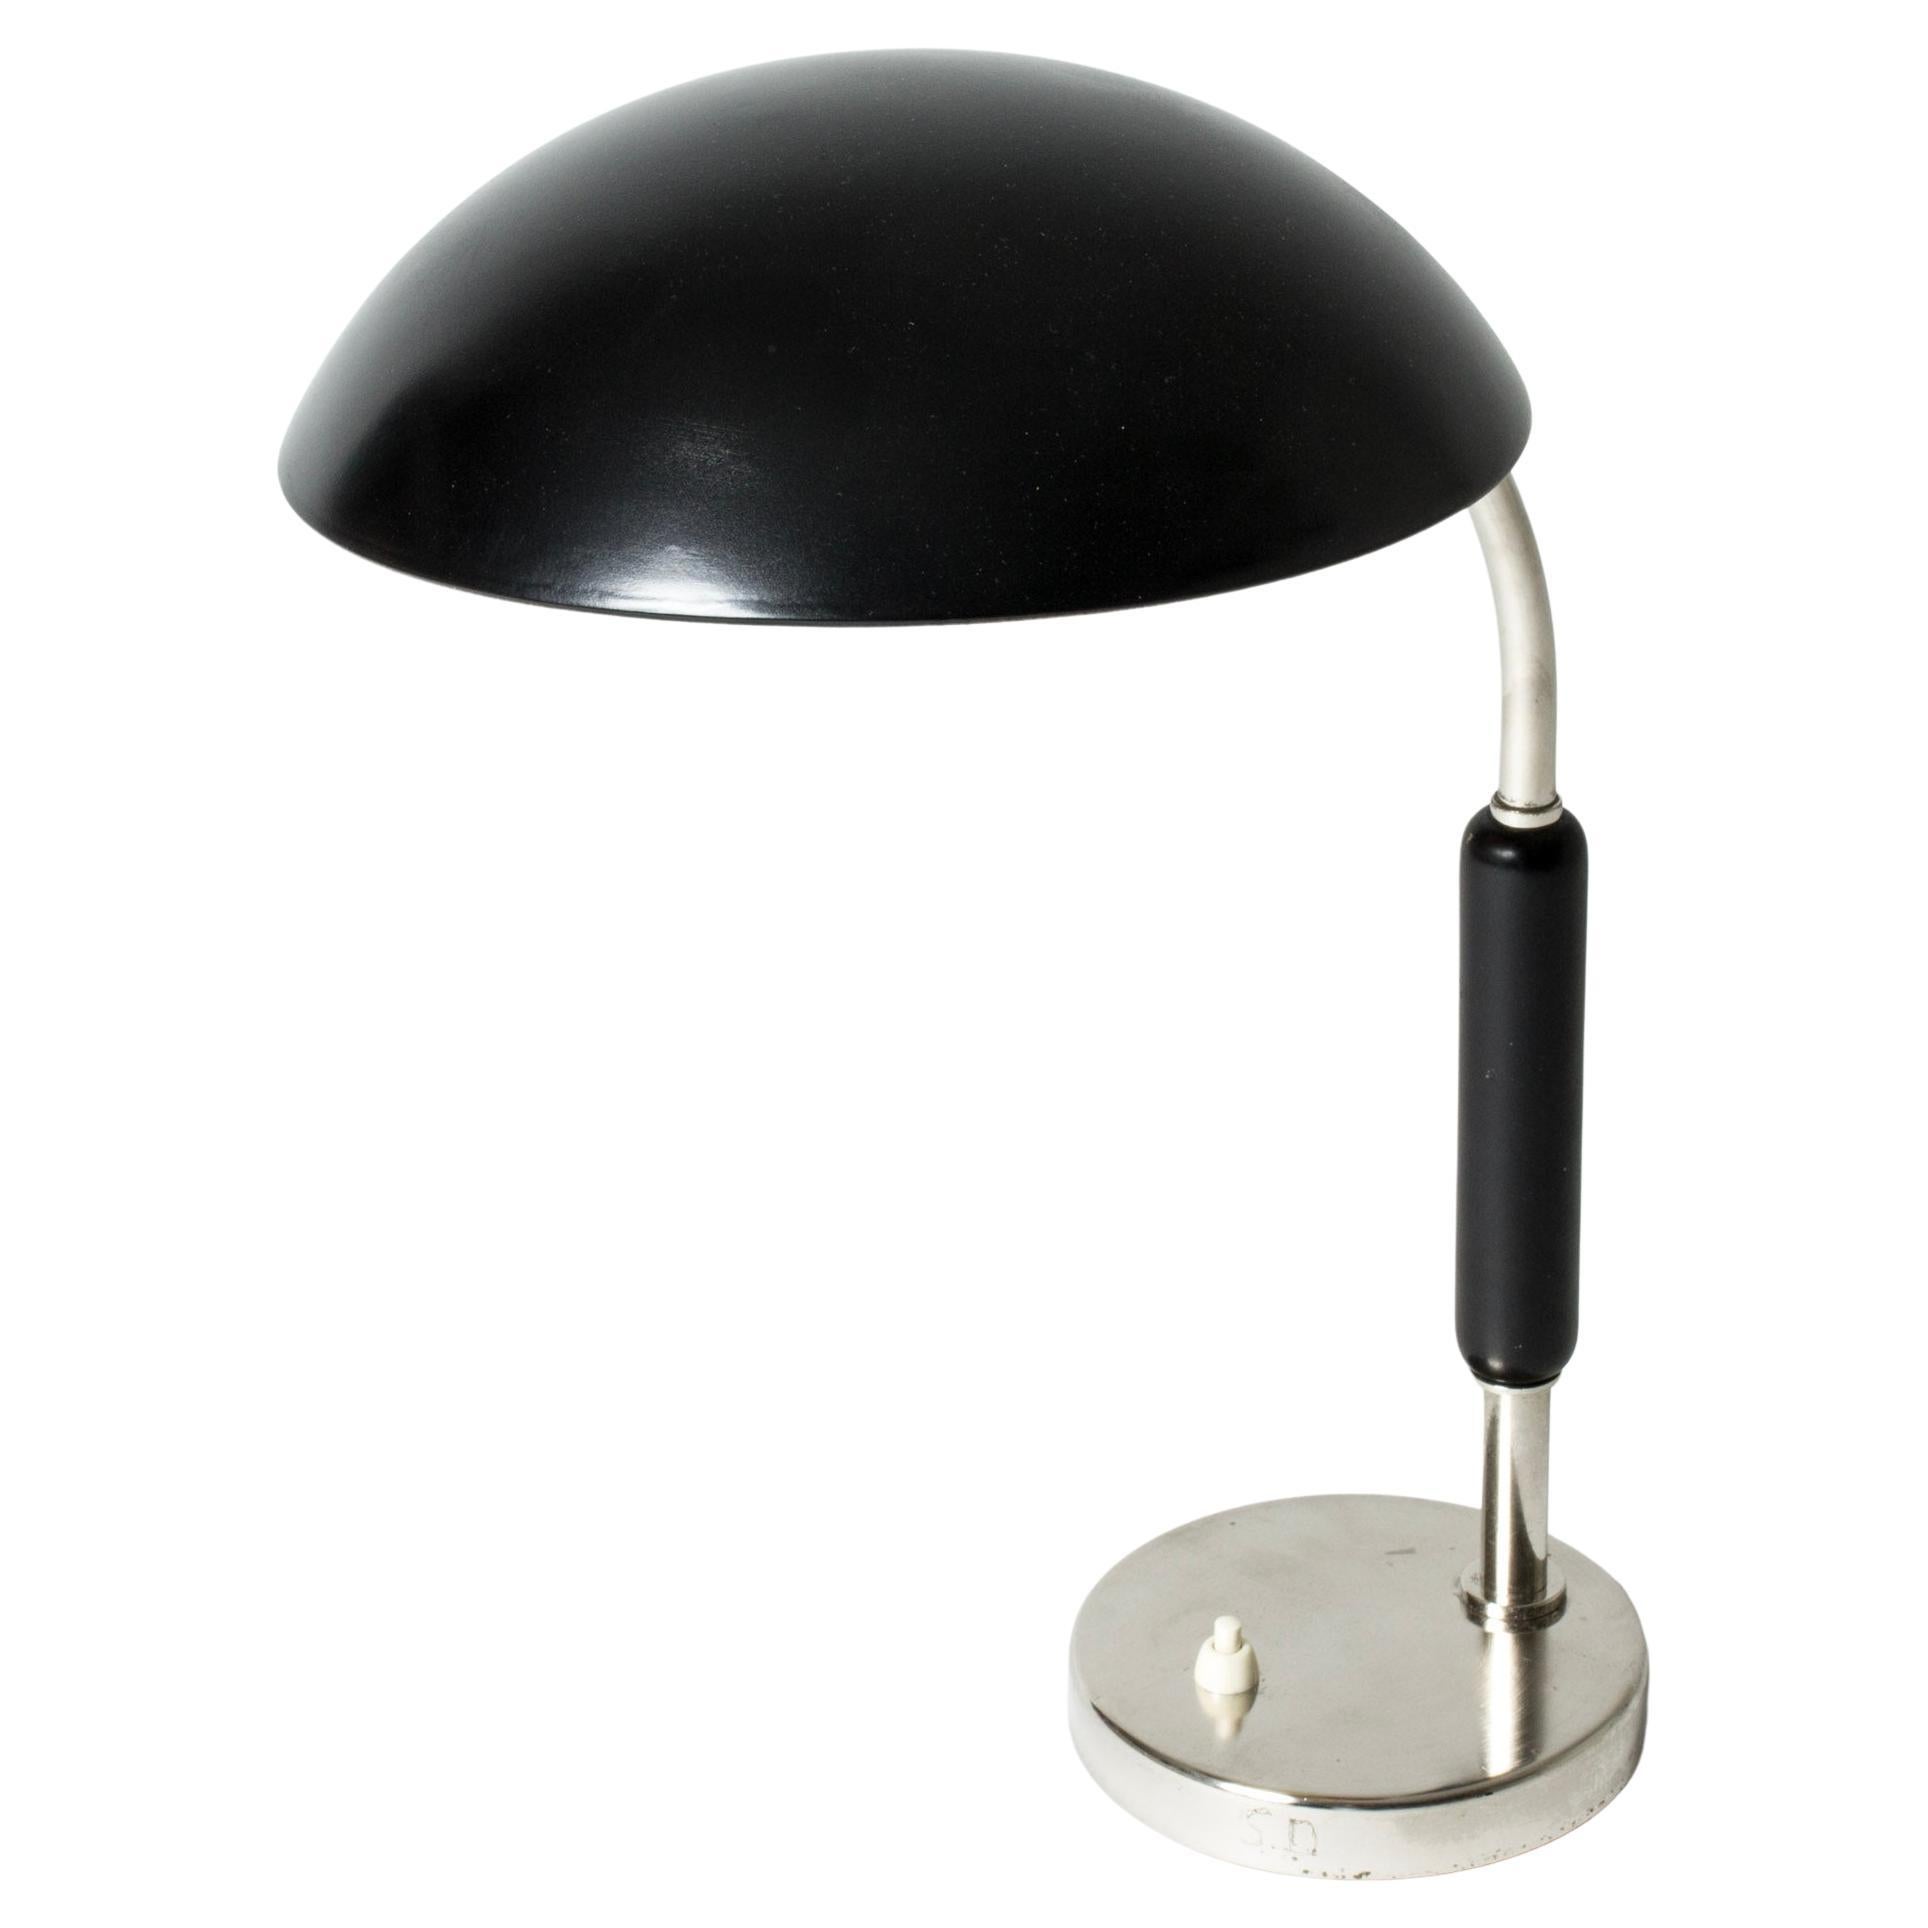 Vintage Functionalist Table or Desk Lamp from ASEA, Sweden, 1930s For Sale